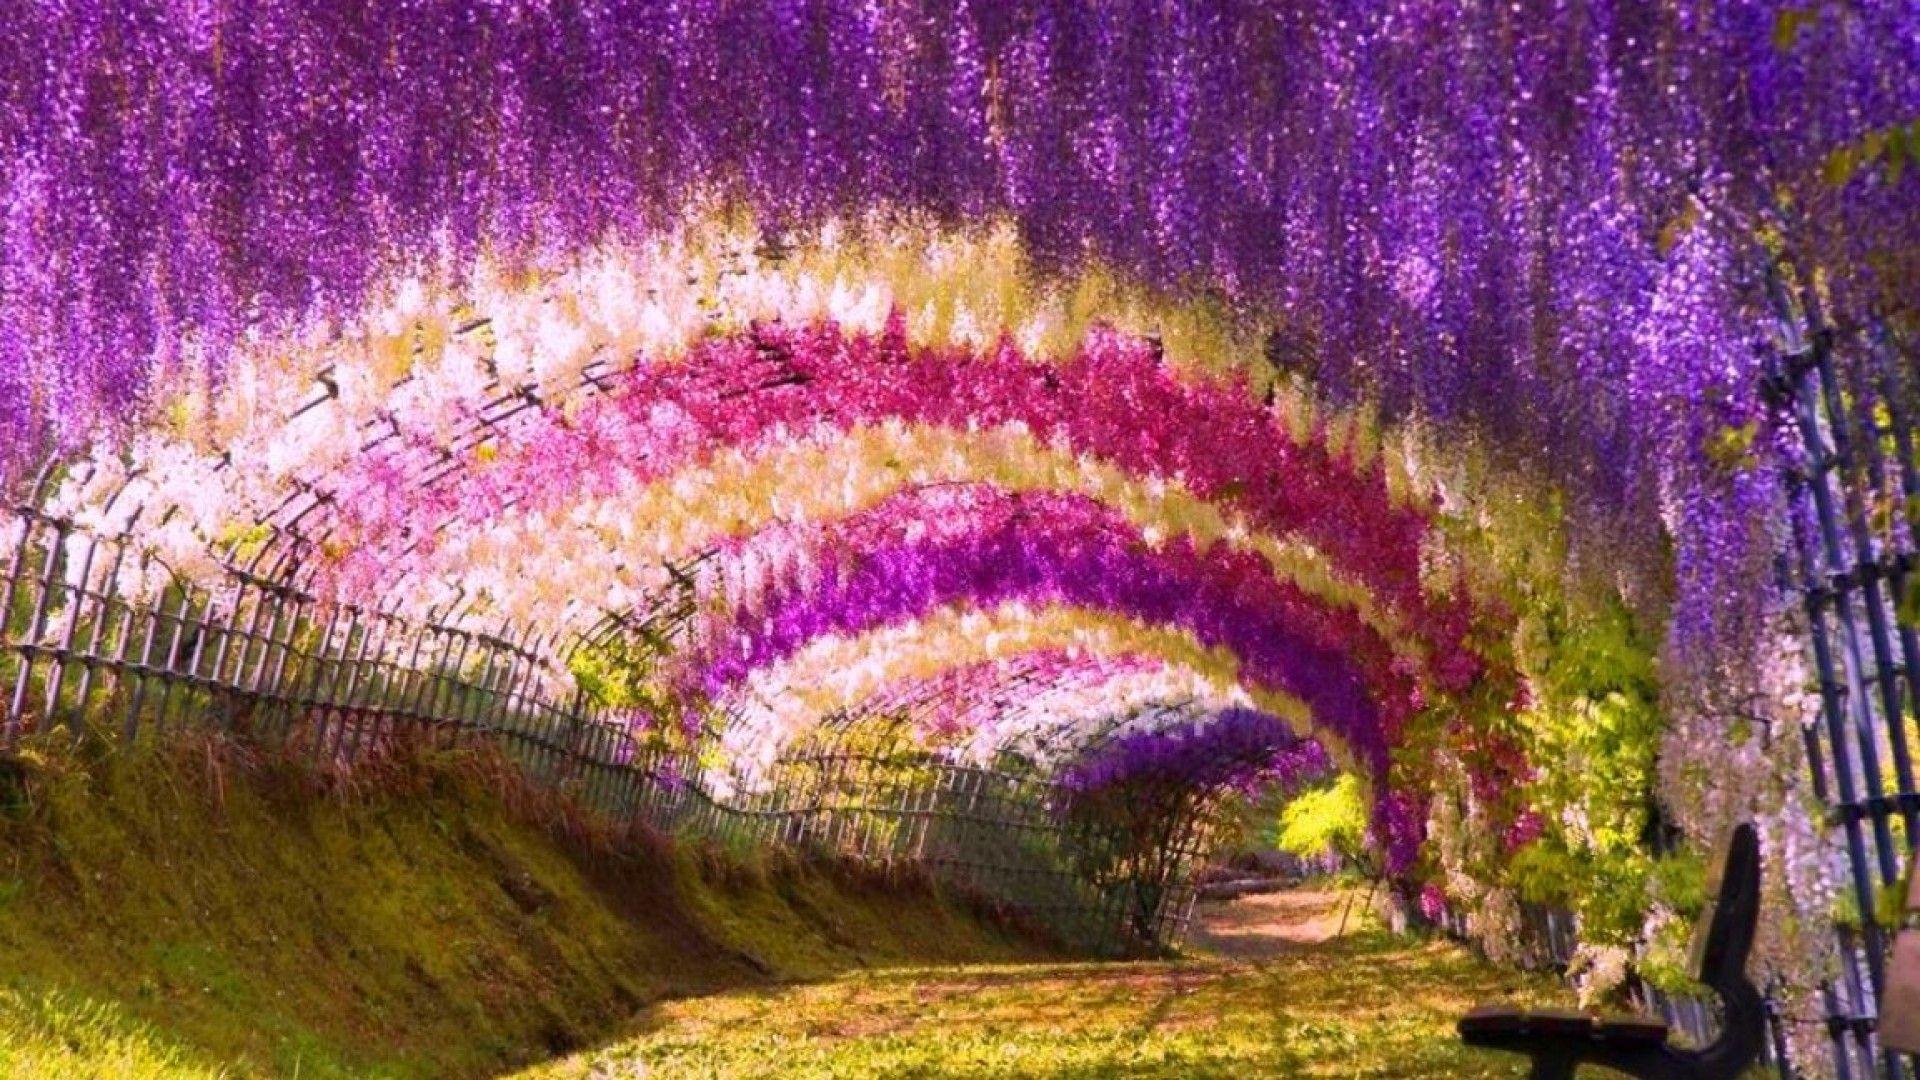 Wisteria Hd Wallpapers Wallpaper Cave